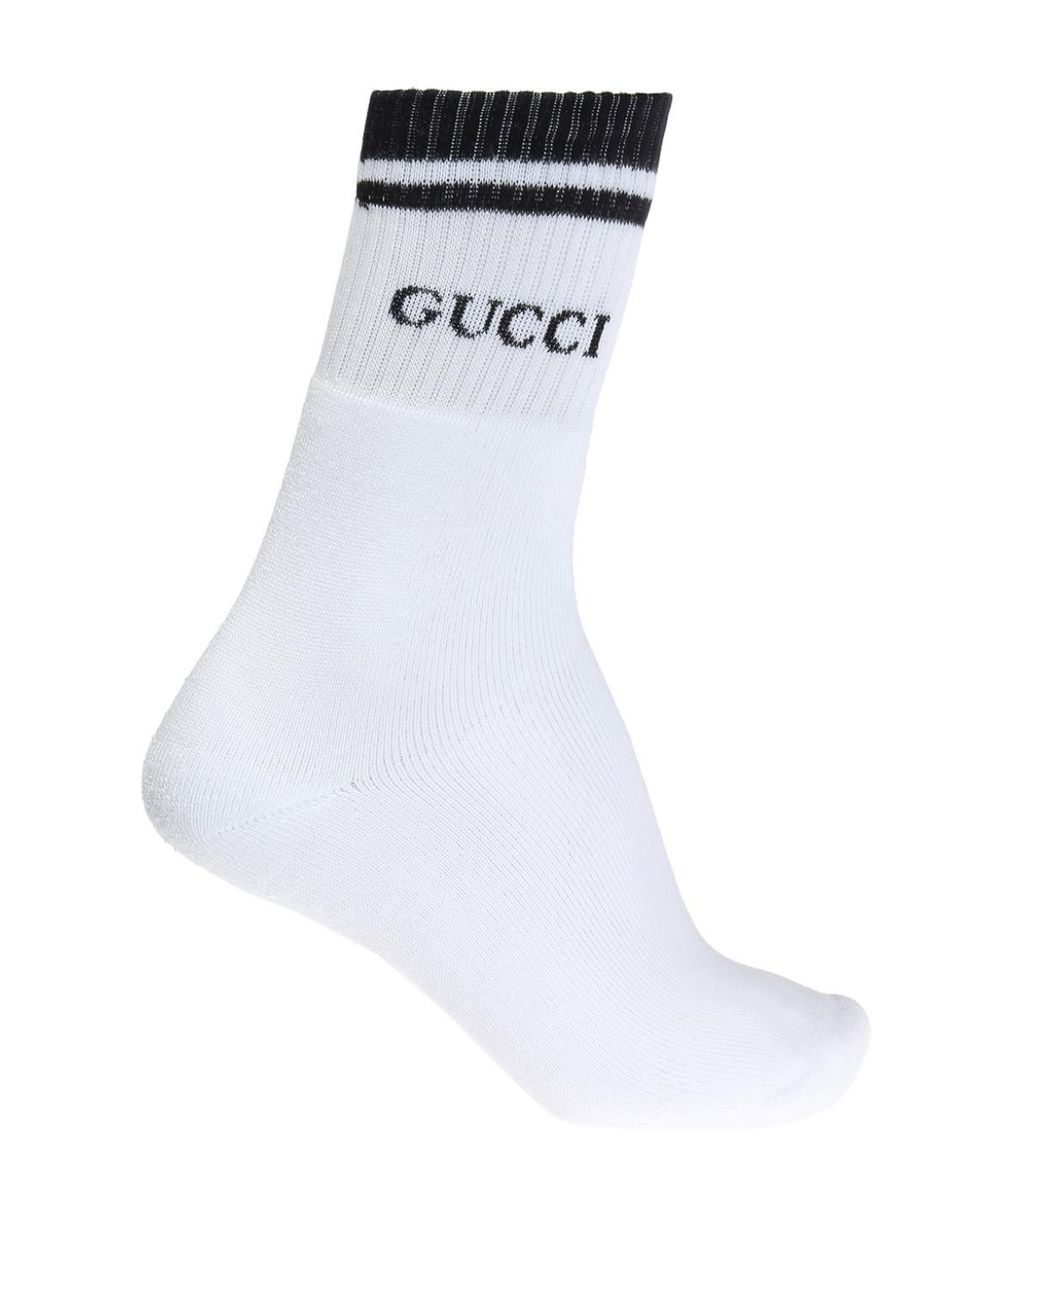 Gucci Cotton Logo Socks in White for Men - Save 4% - Lyst